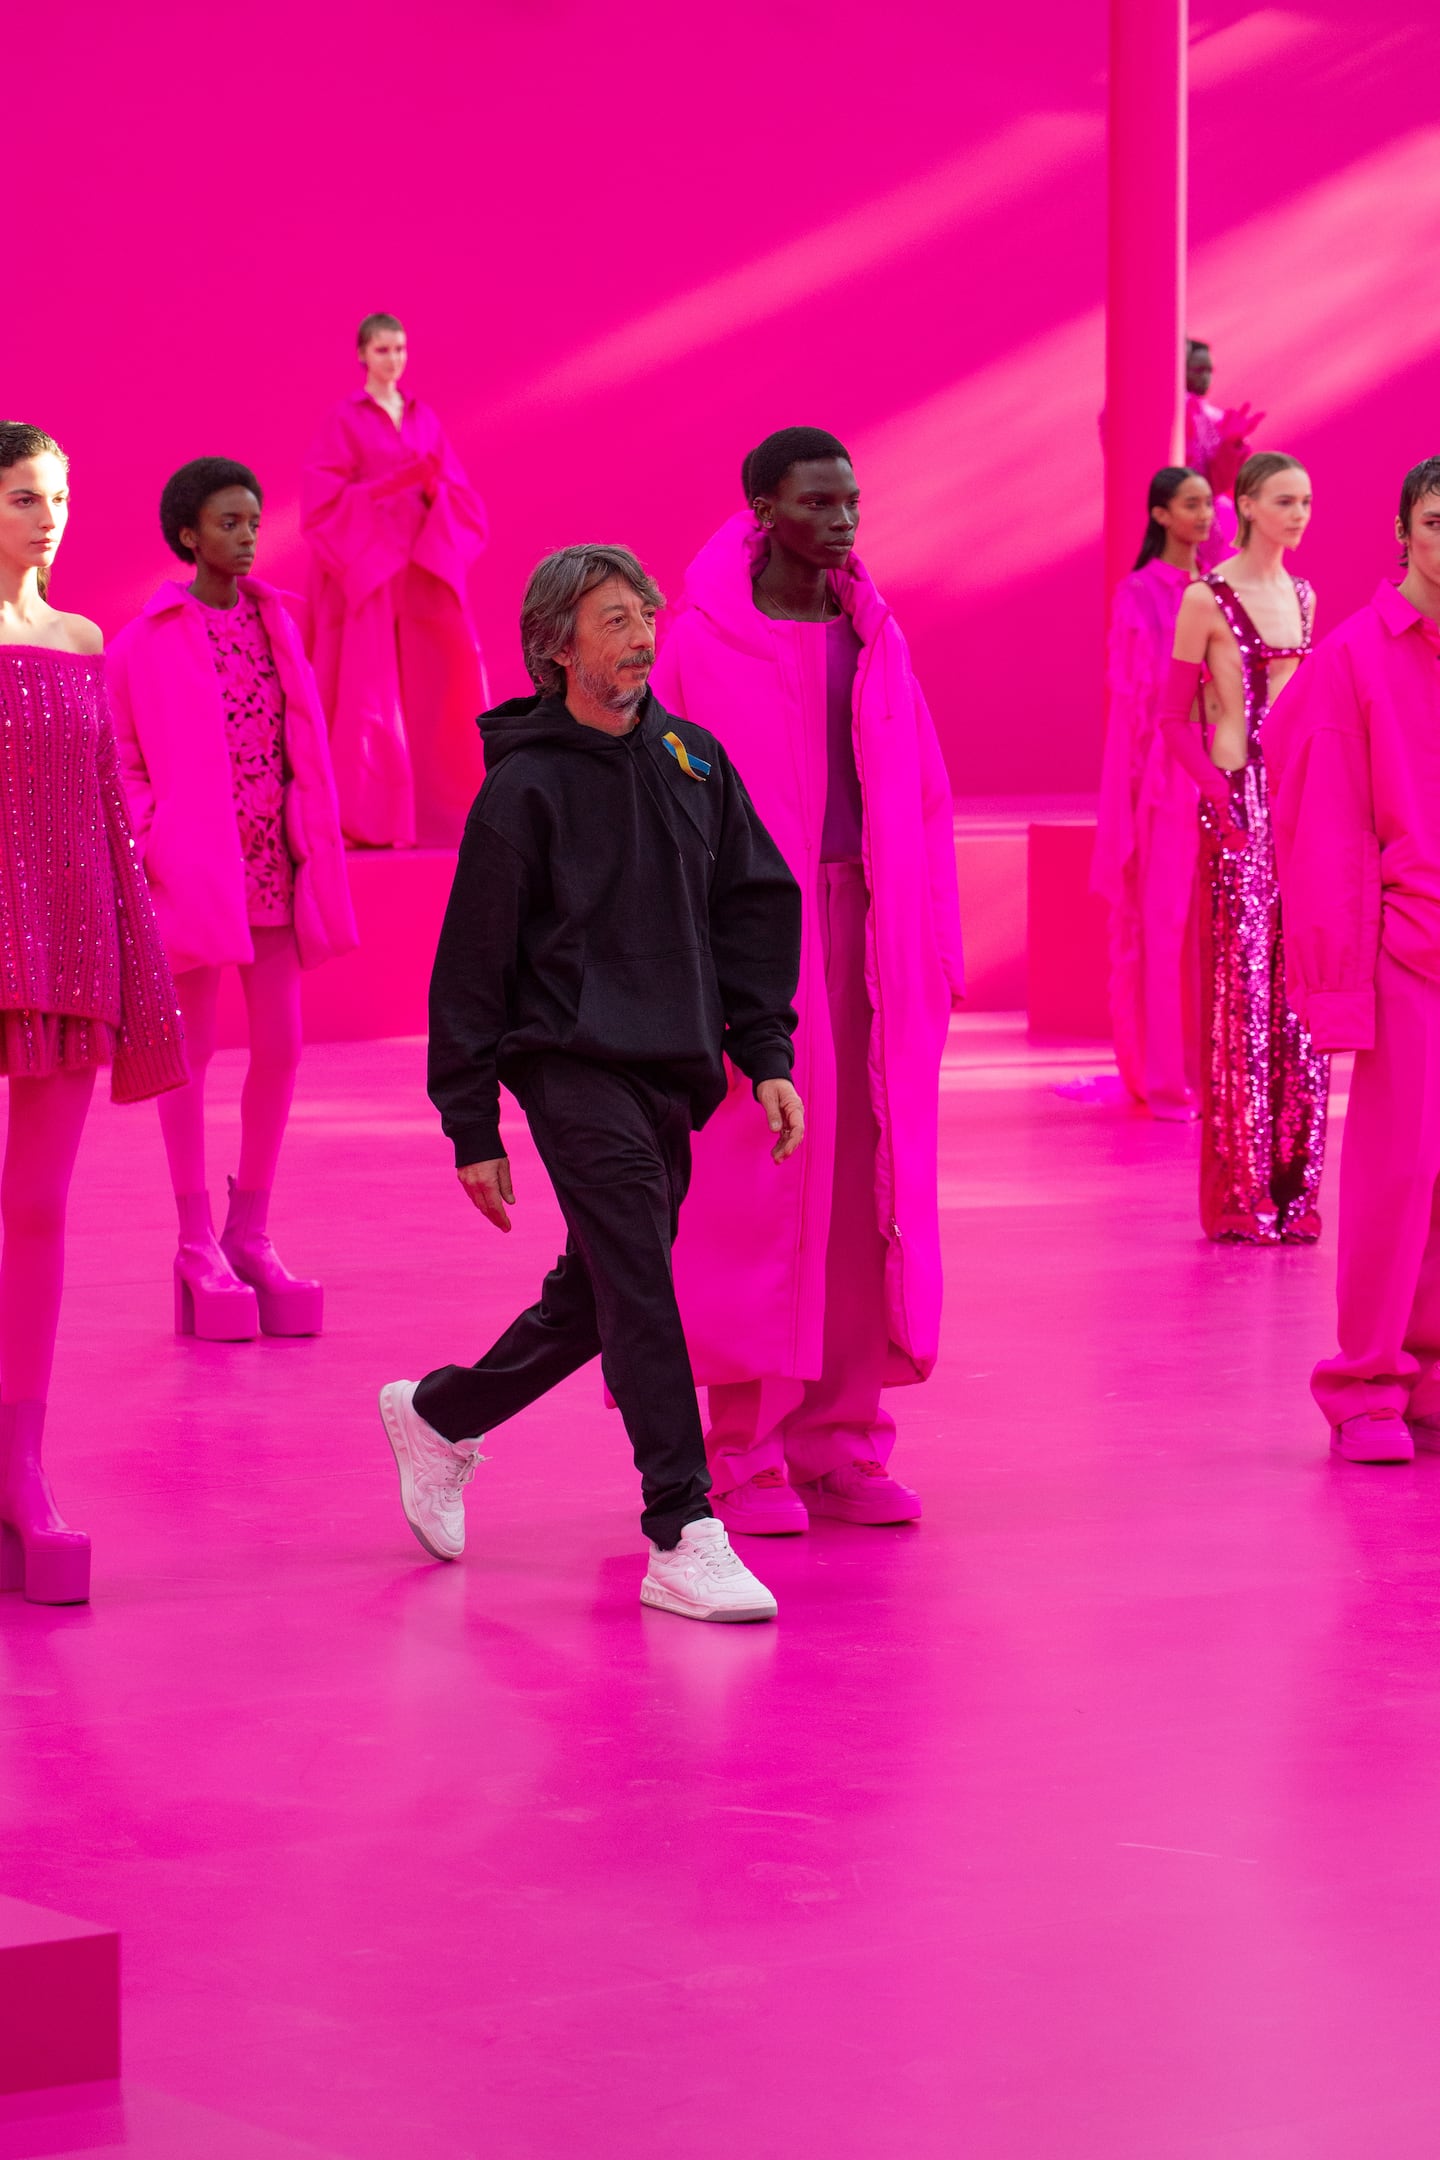 Creative director Pierpaolo Piccioli at Valentino's Autumn/Winter 2022 show, which has helped set off a pink flurry in fashion.